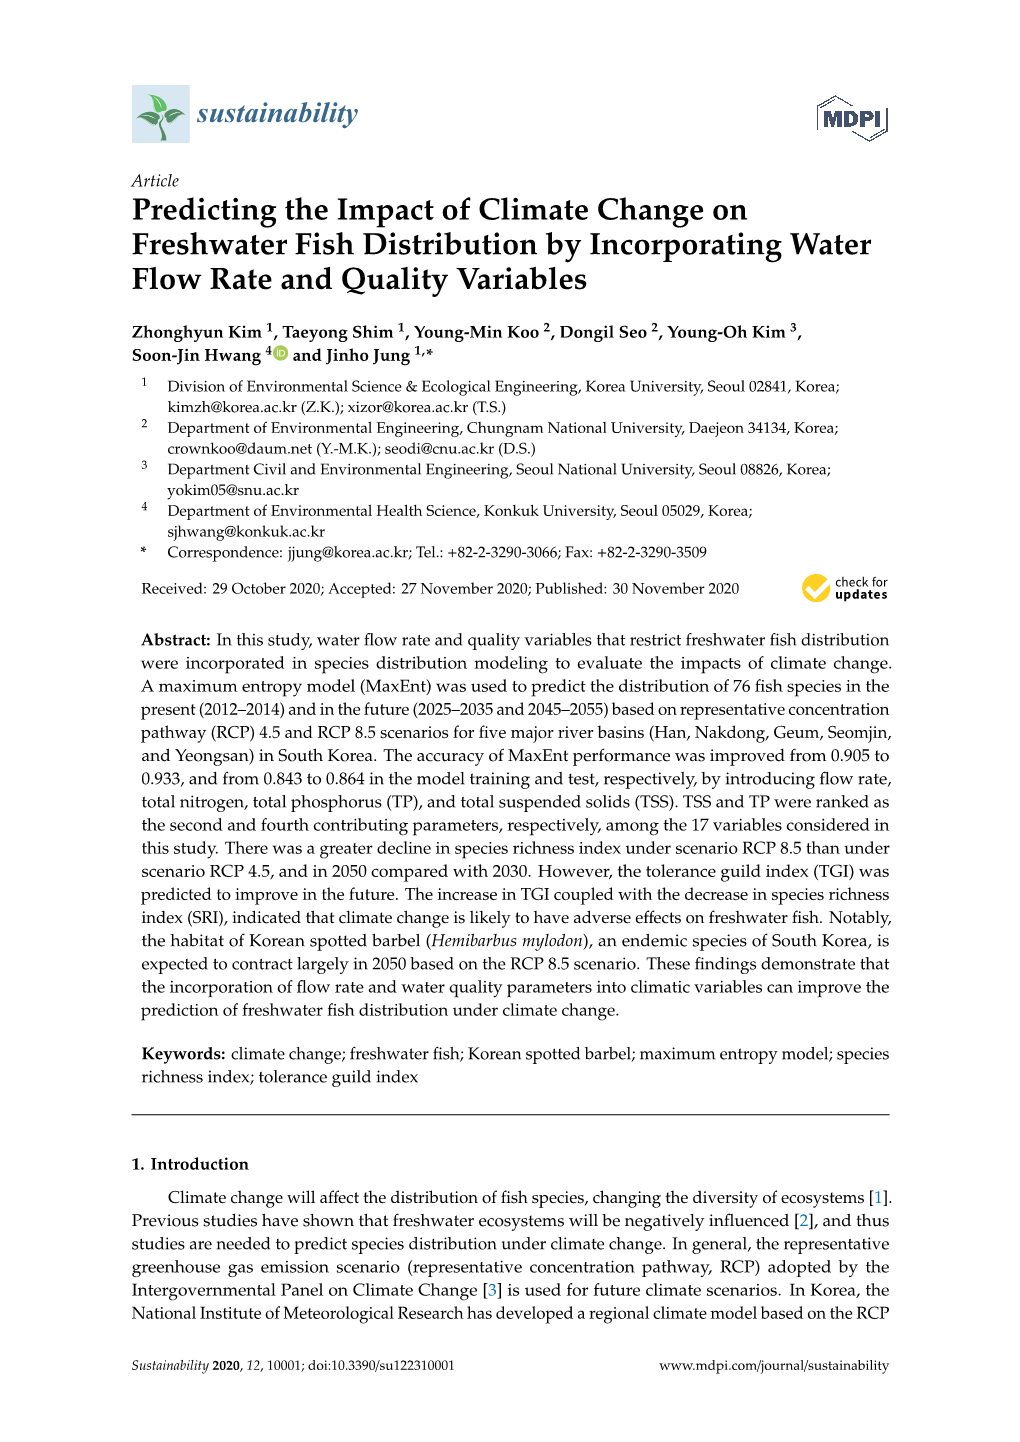 Predicting the Impact of Climate Change on Freshwater Fish Distribution by Incorporating Water Flow Rate and Quality Variables